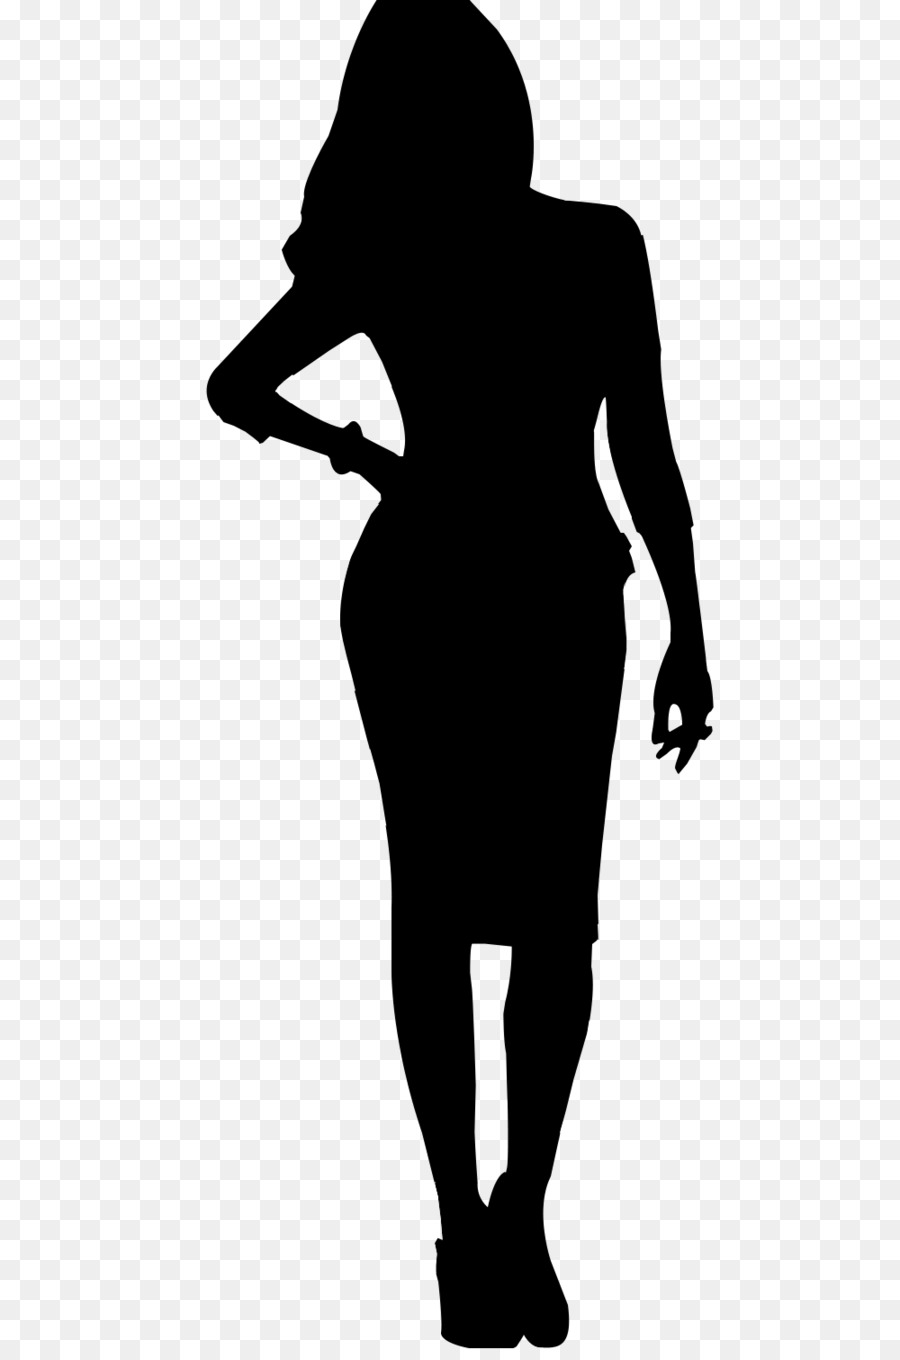 Free Silhouette Of Girl In Dress, Download Free Silhouette Of Girl In ...